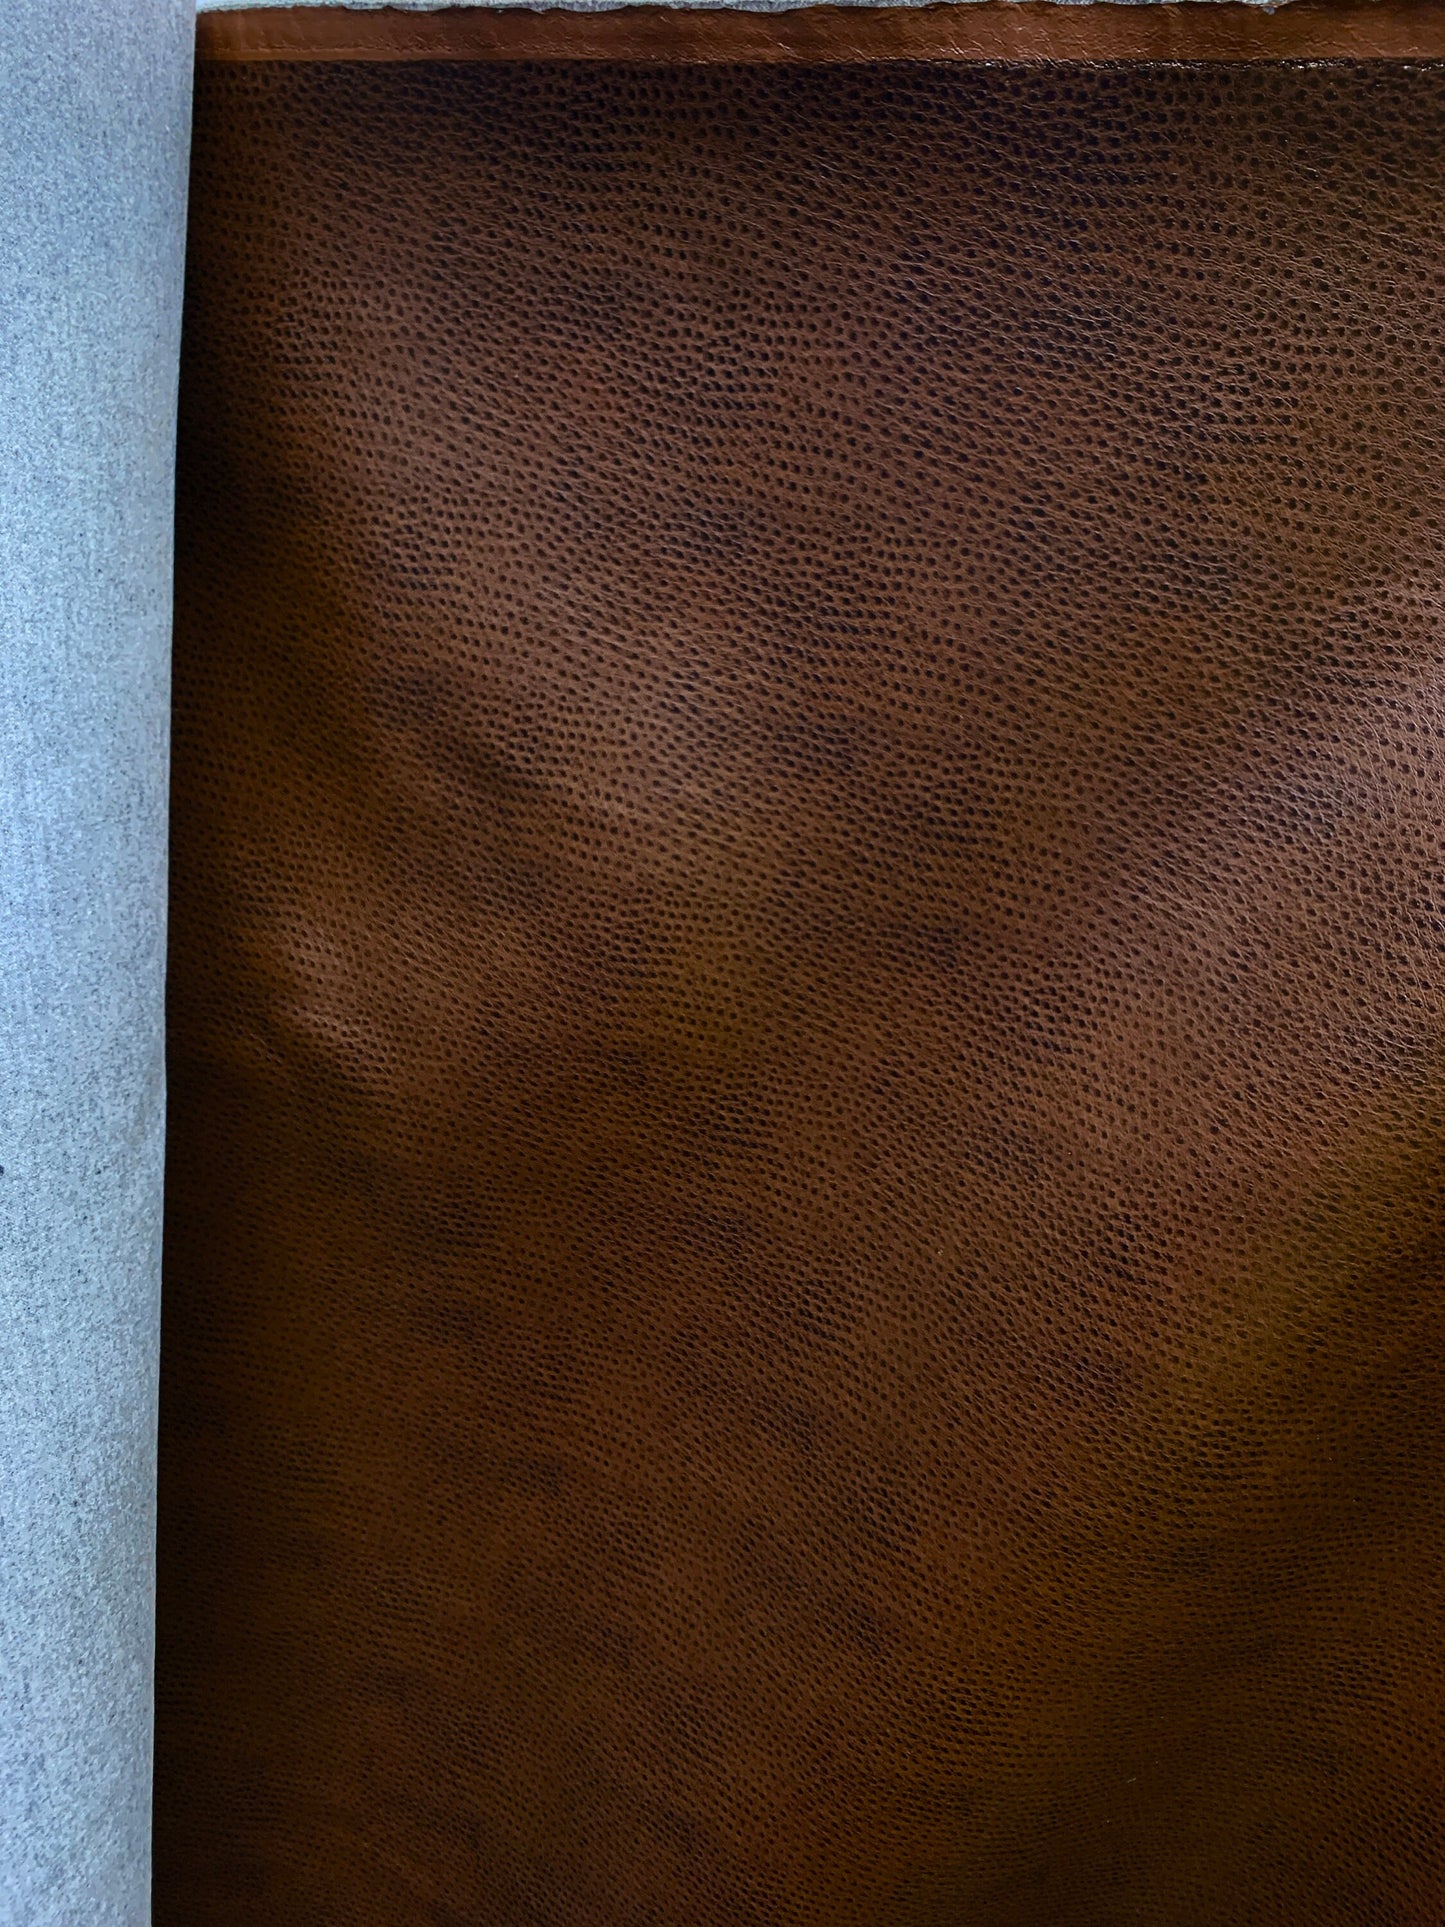 BROWN Ostritch Faux Leather Vinyl Upholstery Fabric (54 in.) Sold By The Yard